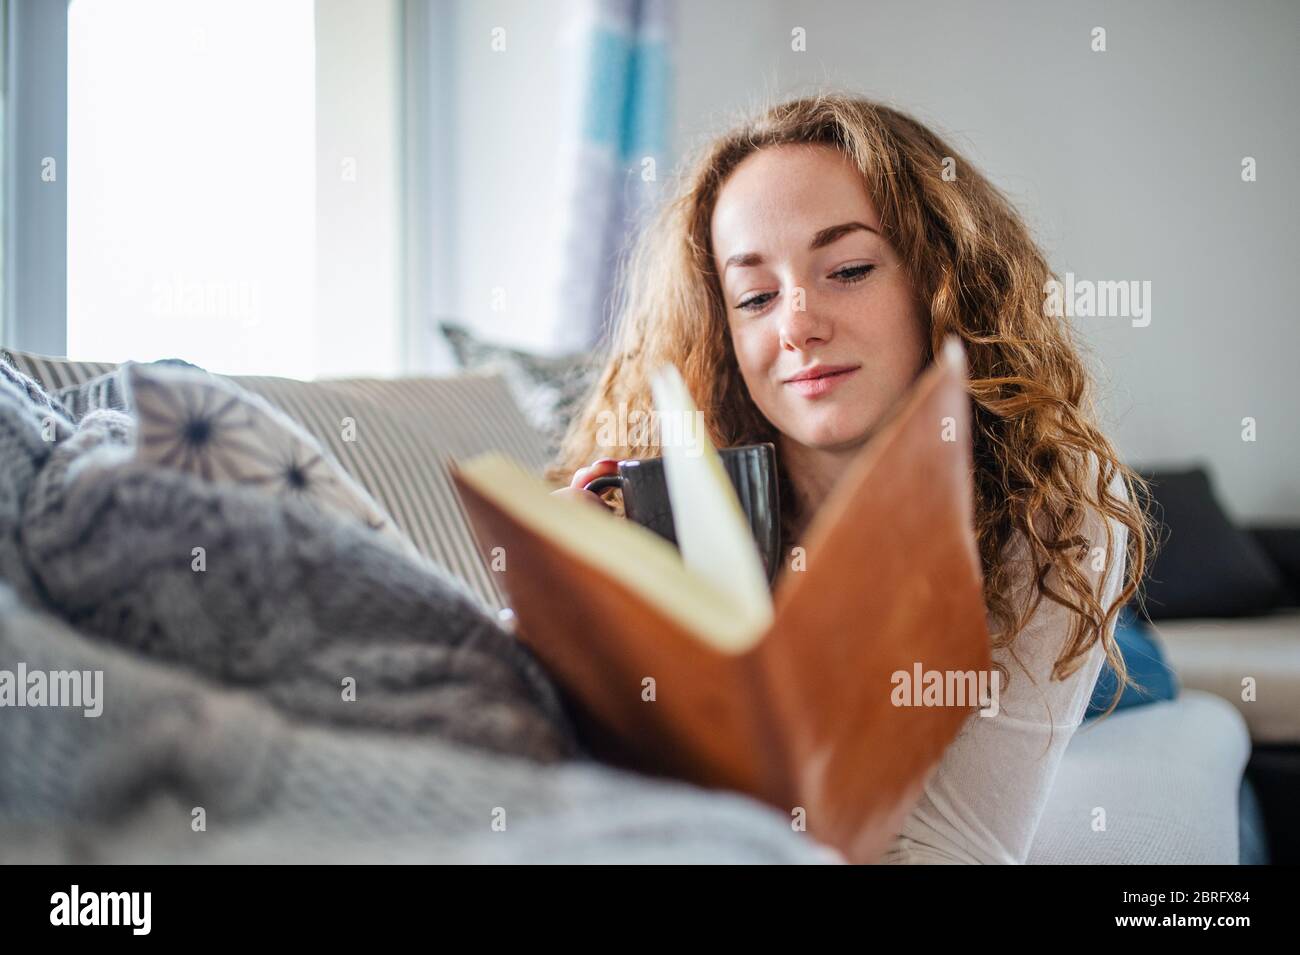 Young woman relaxing indoors at home with book. Stock Photo